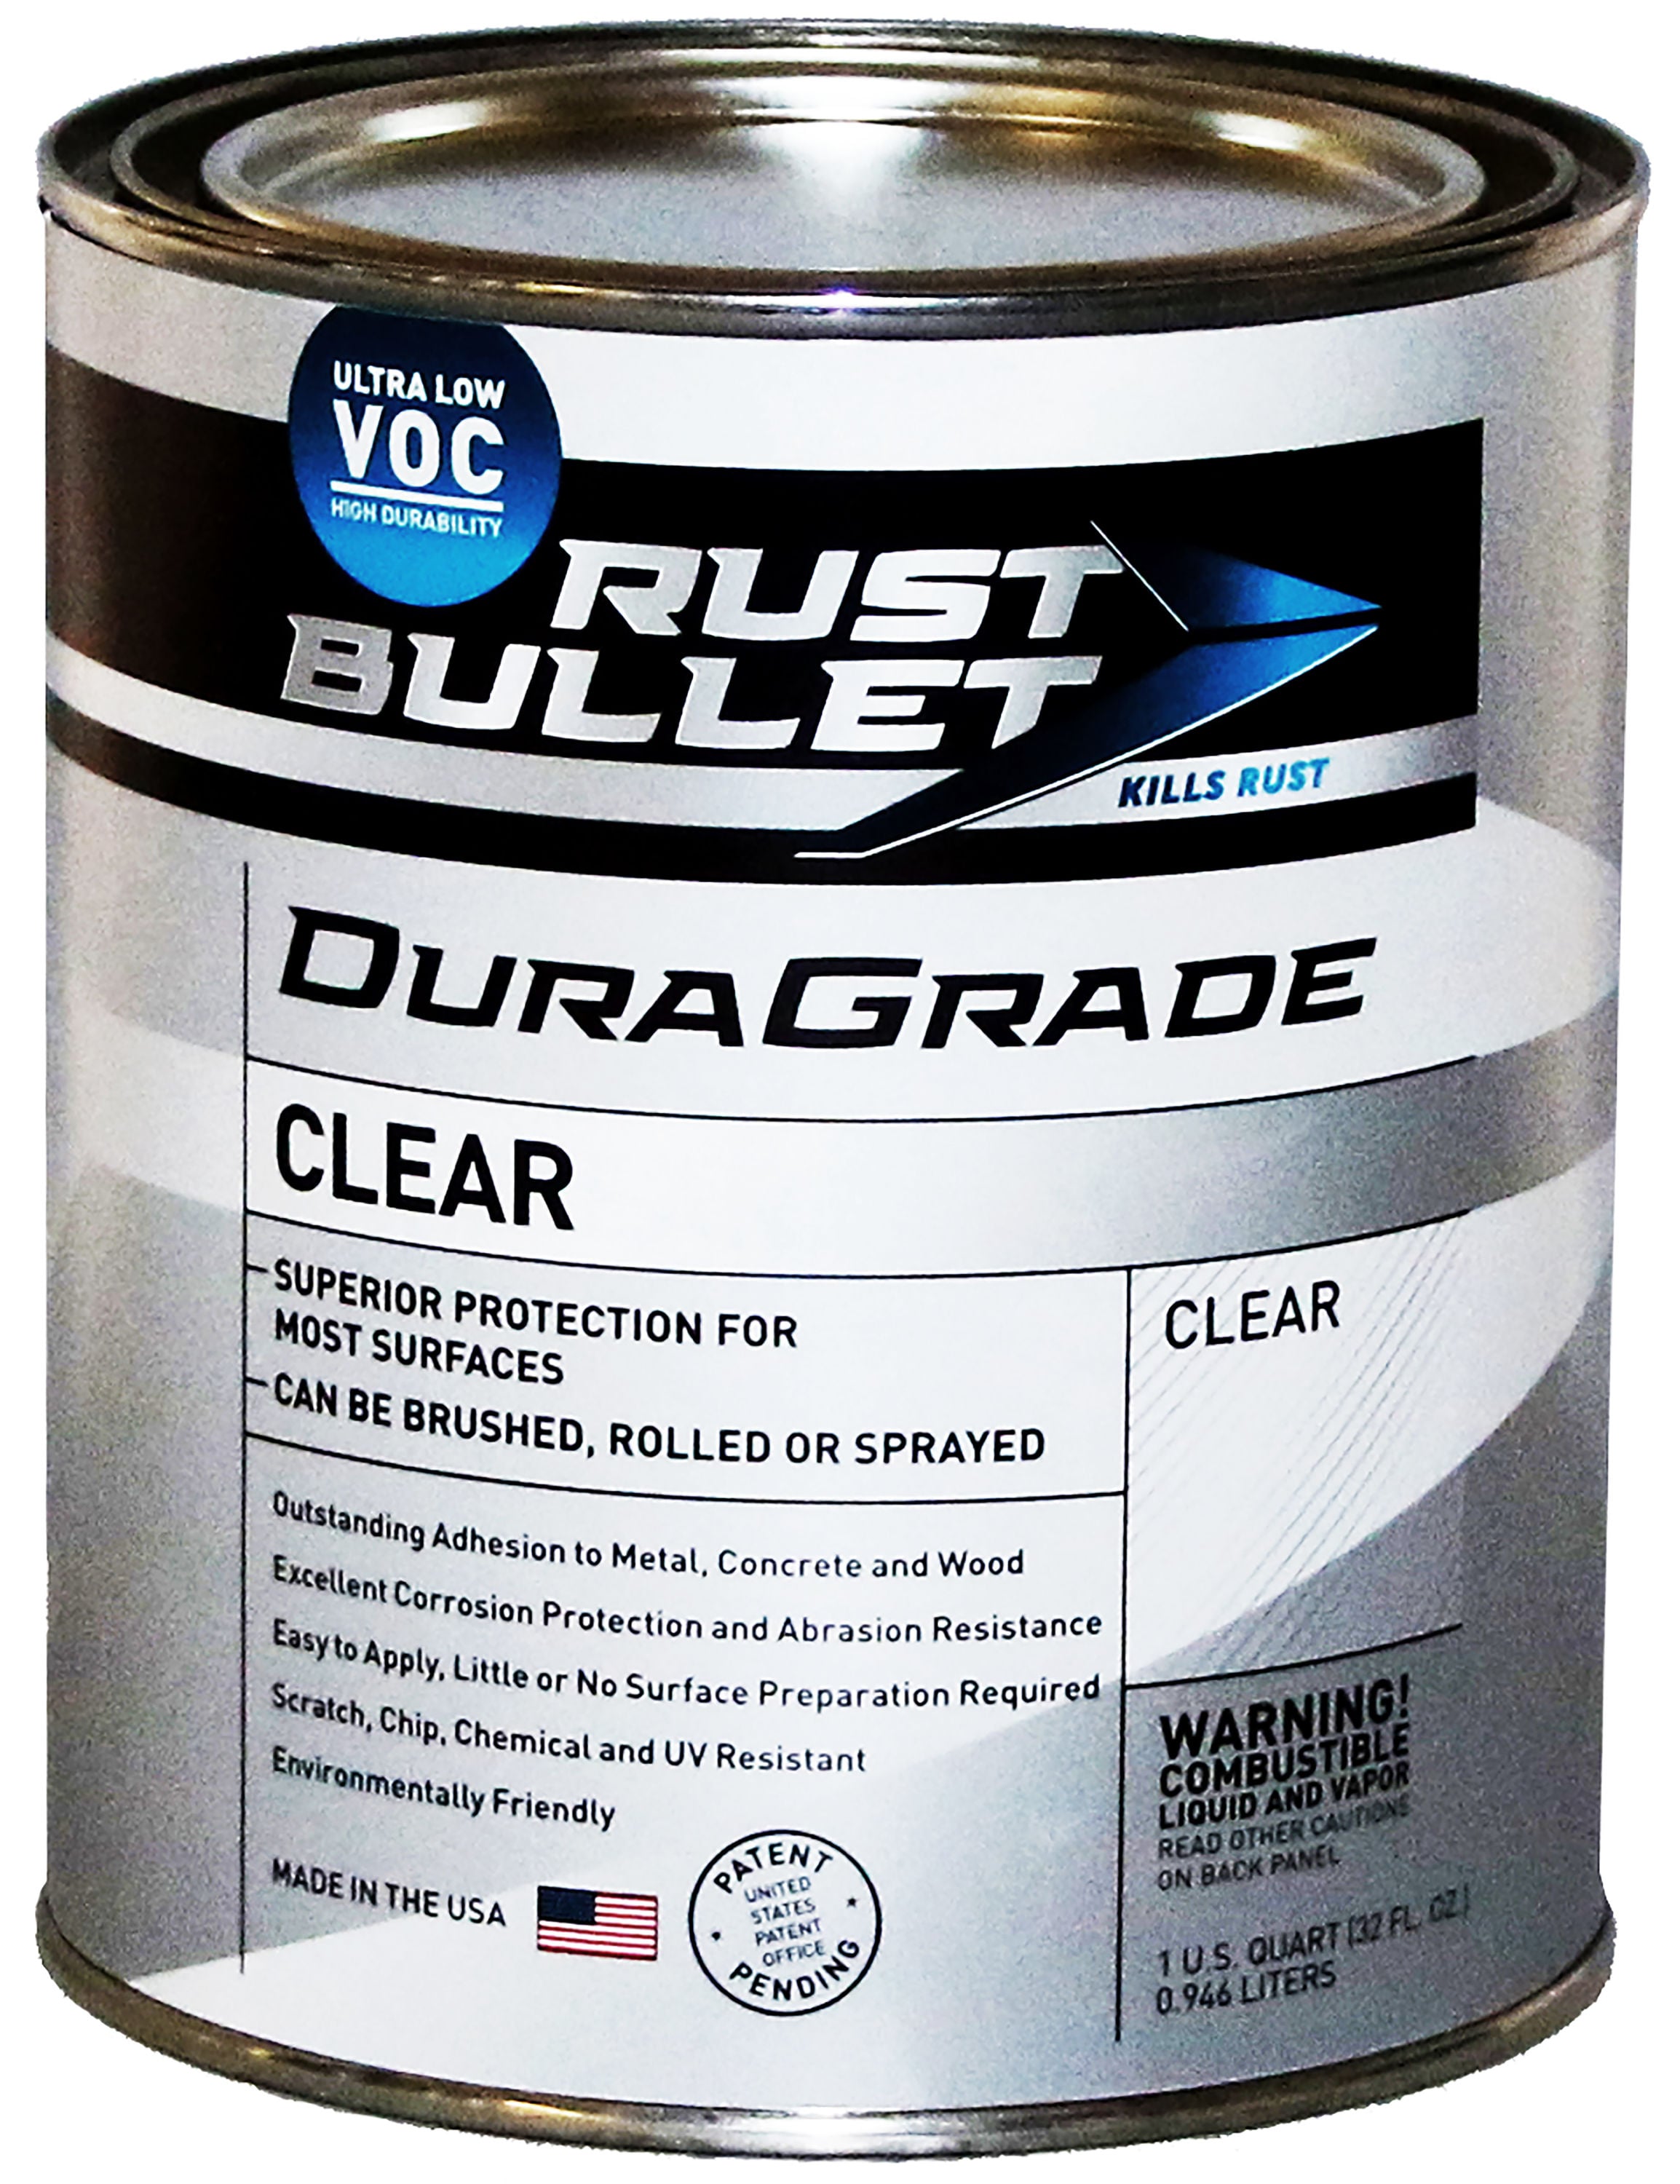 Rust Bullet DuraGrade Clear – High Performance Clear Coat for Concrete, Automotive, Wood and Metal Finishes, Impact Resistant, Ultra-Low VOC - Clear